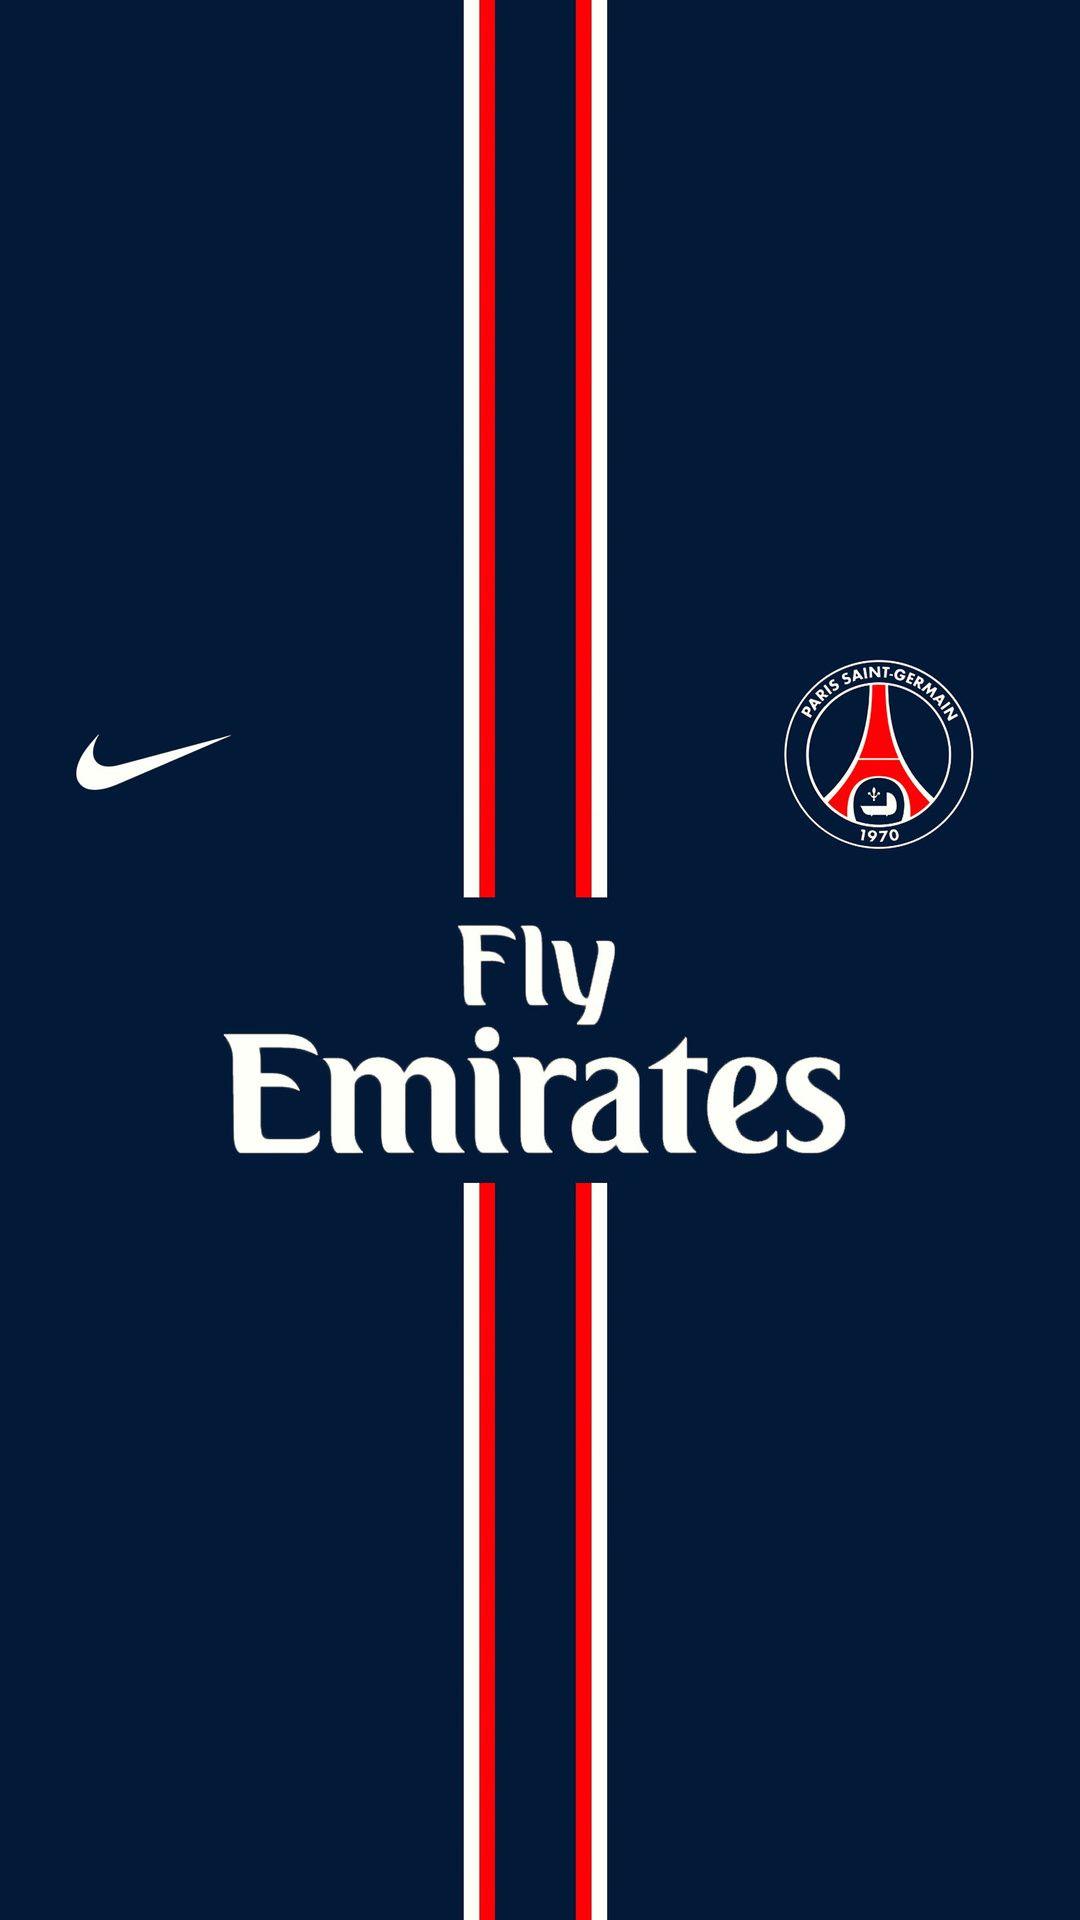 image about PSG. PSG, Saints and Soccer poster